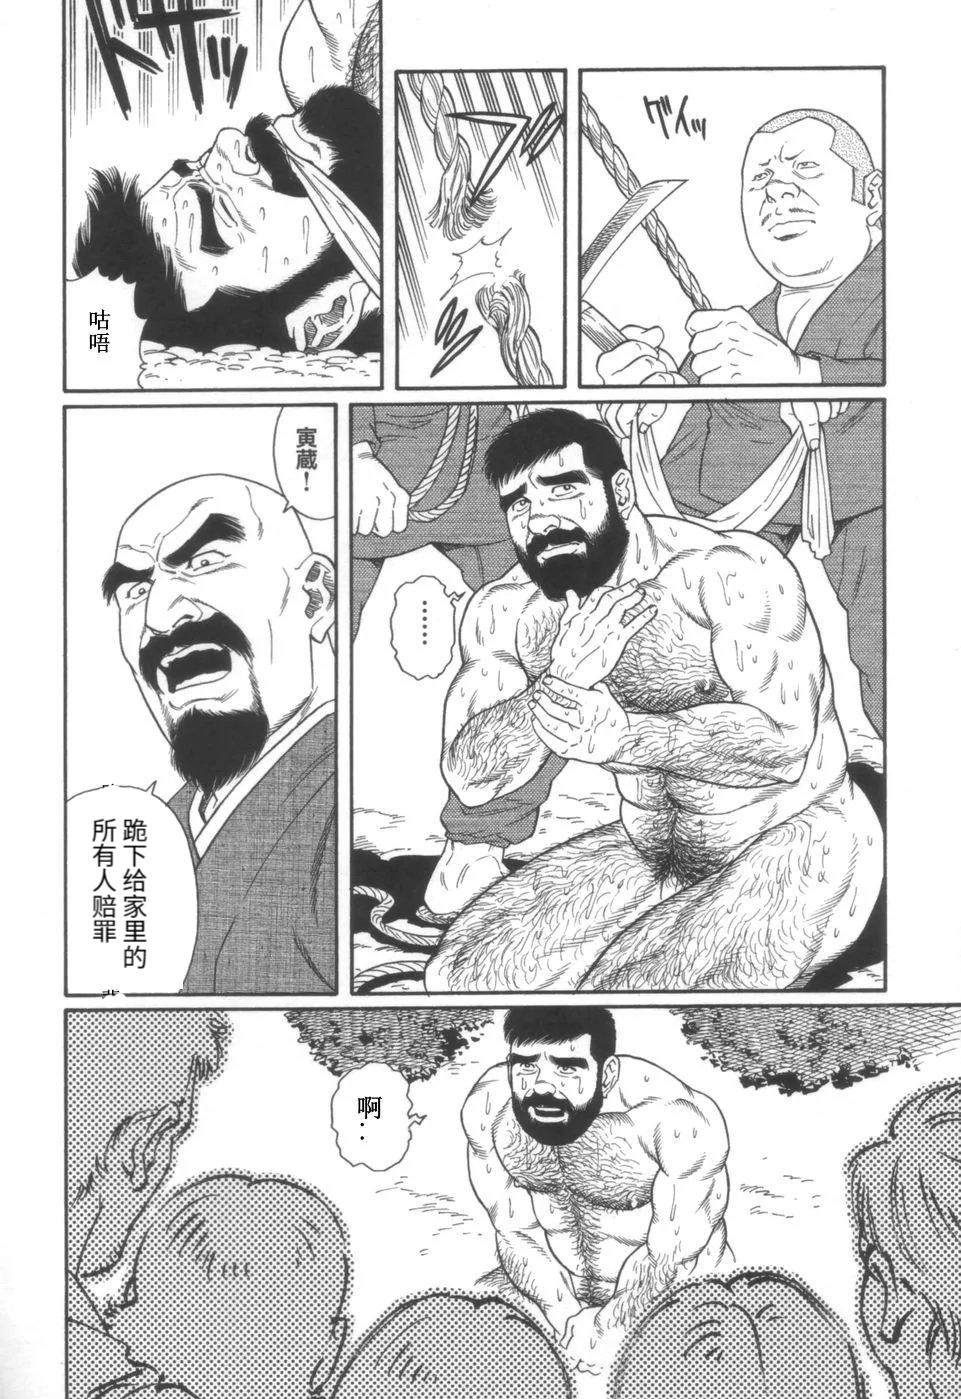 [Tagame Gengoroh] Gedou no Ie Joukan | 邪道之家 Vol. 1 Ch.5 [Chinese] 25